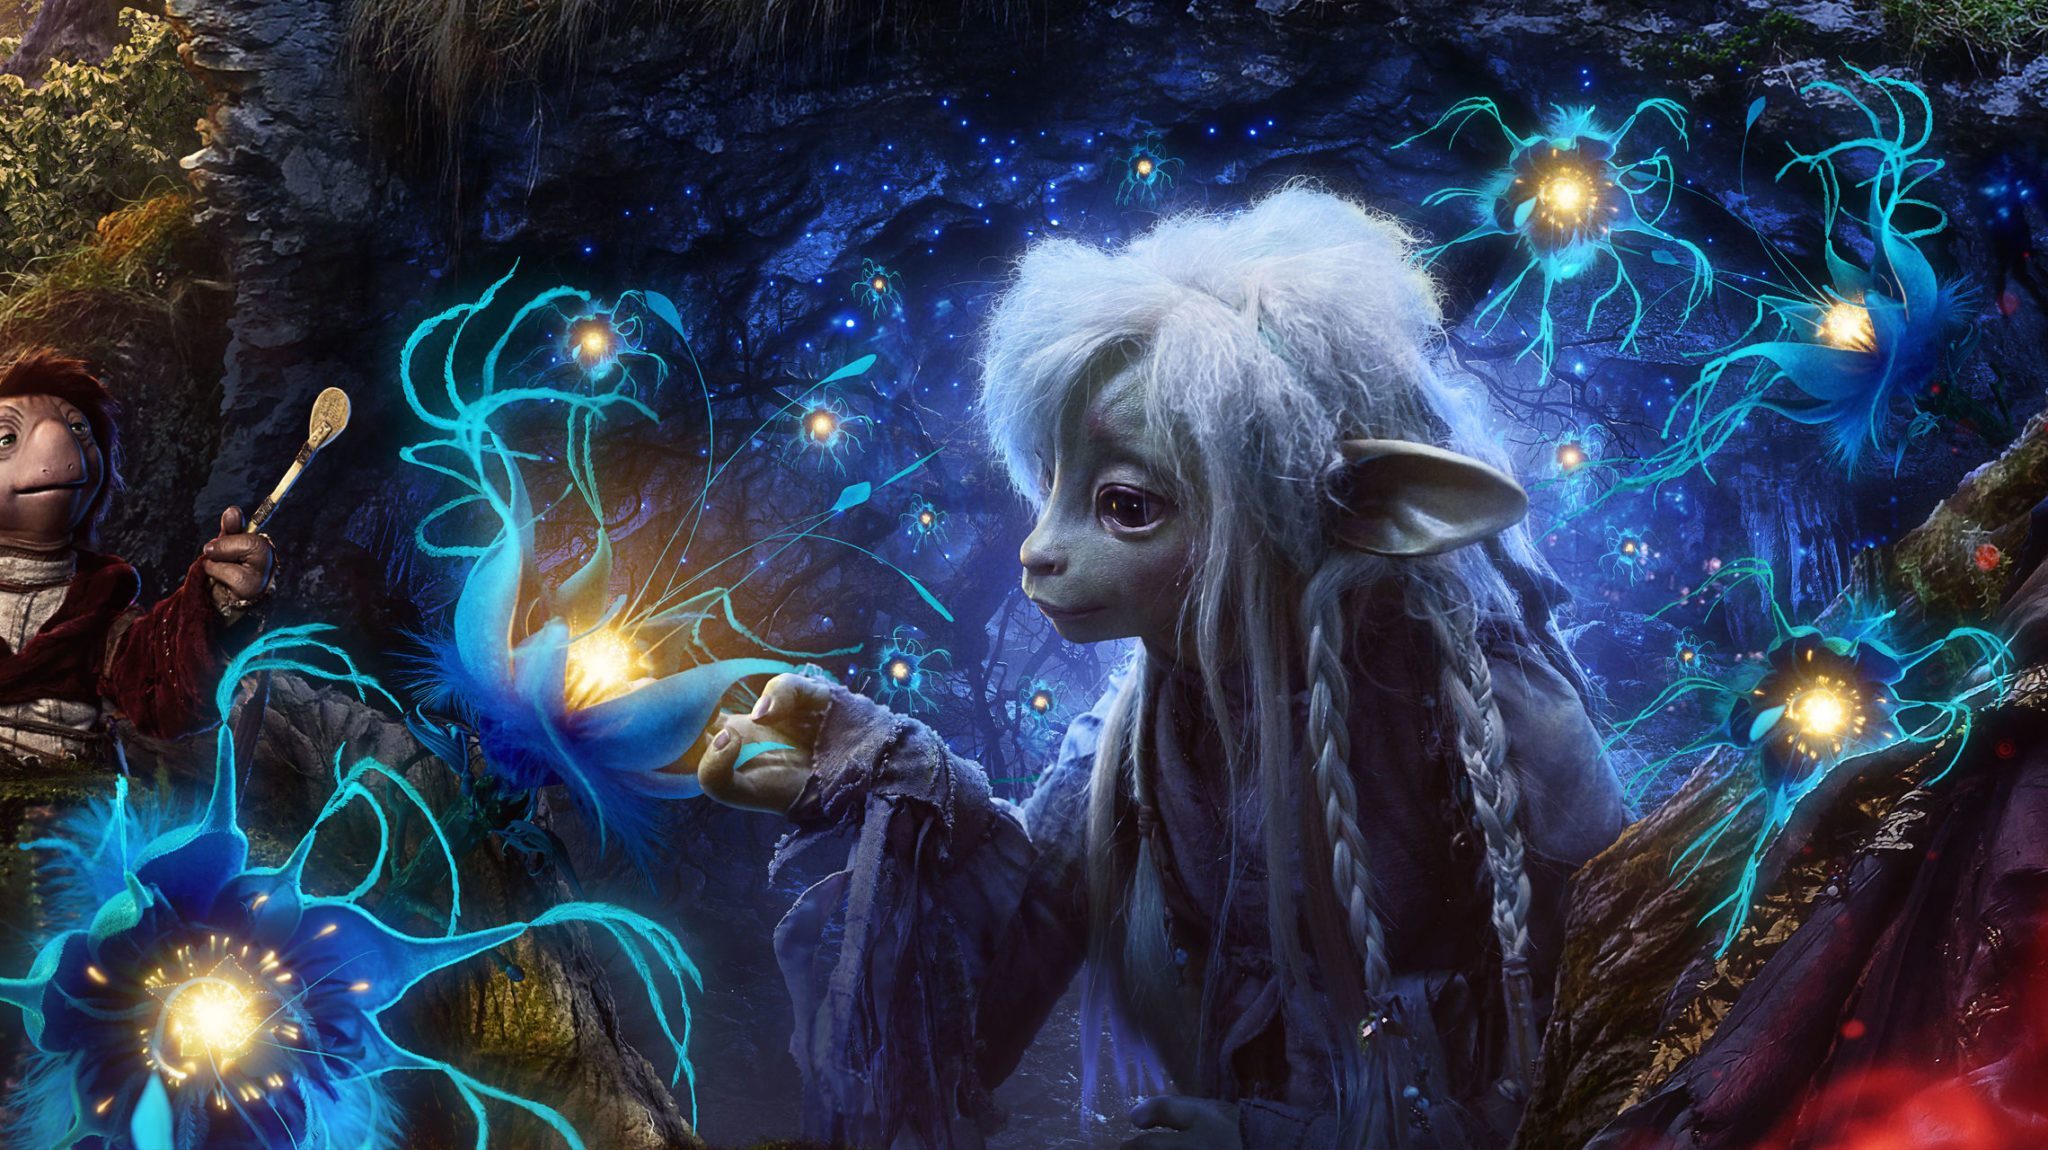 Netflix To Release Two Soundtracks Along With The Series The Dark Crystal: Age of Resistance